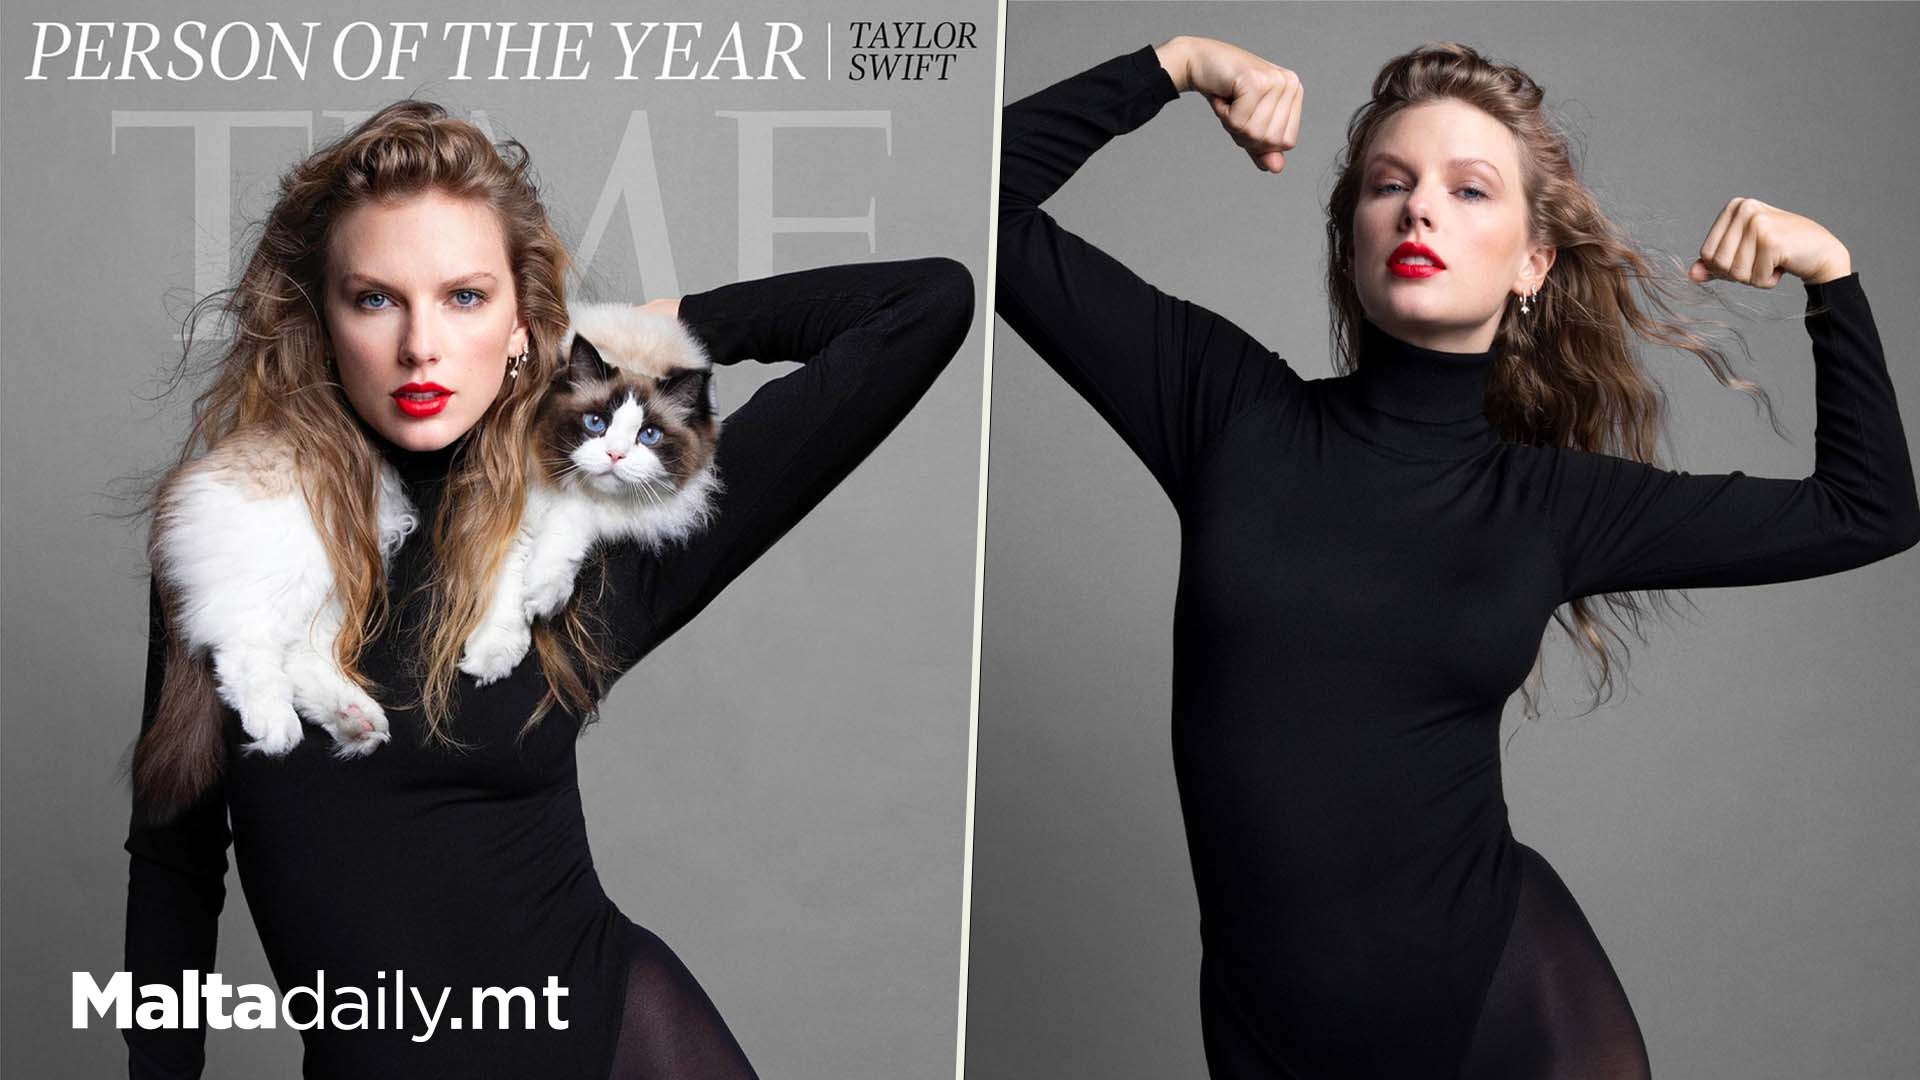 Taylor Swift named Time Magazine's 2023 Person of the Year